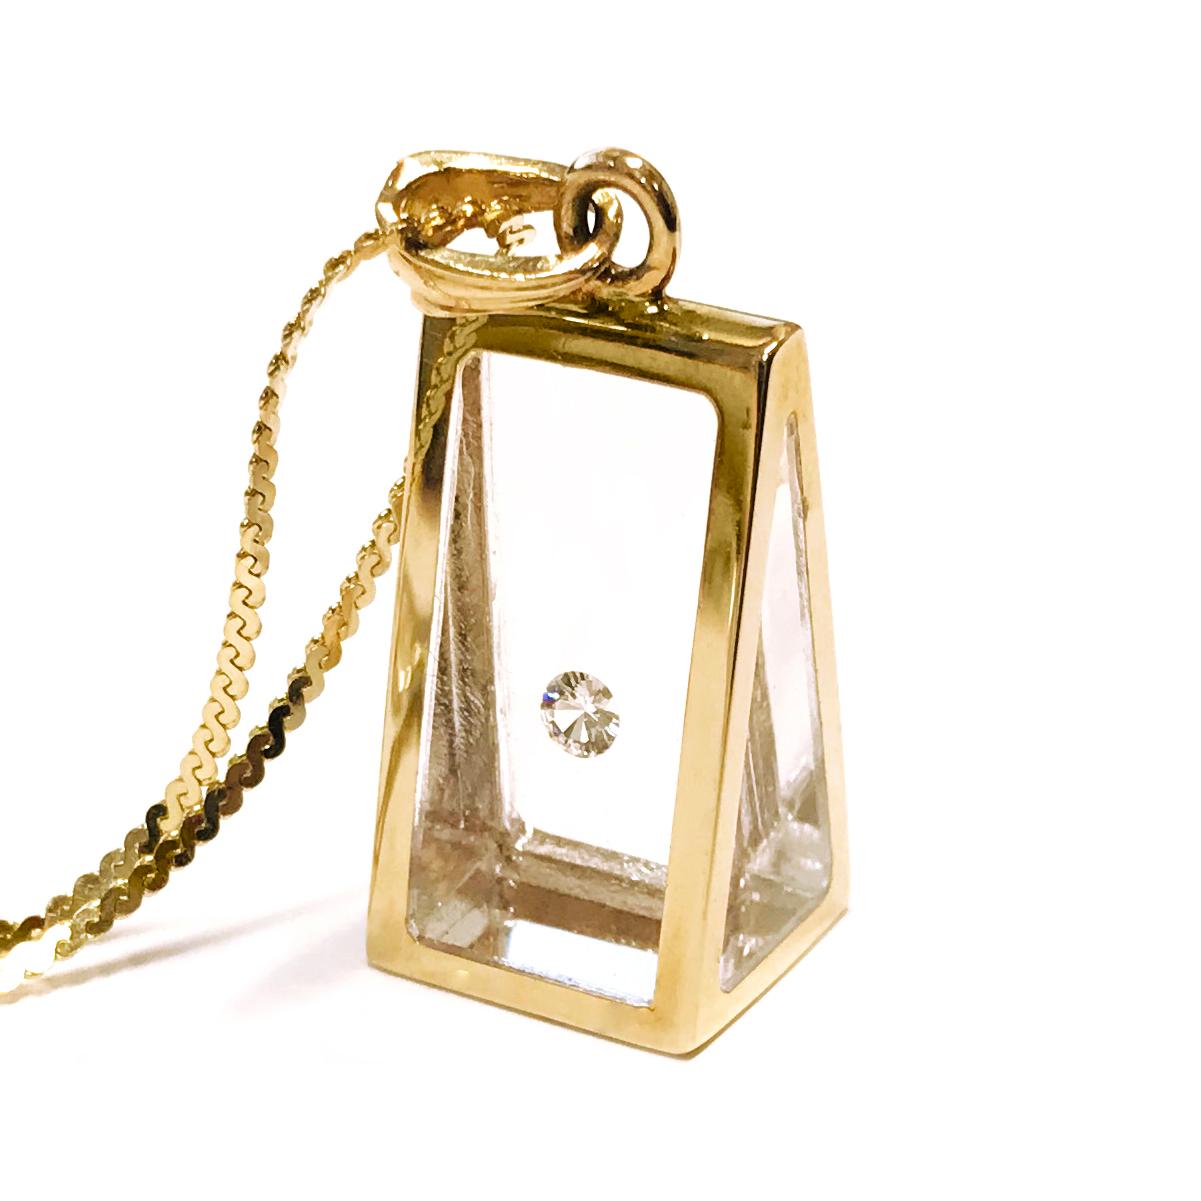 Incogem Floating Diamond Pyramid Pendant: 14k Yellow Gold. The pendant is handcrafted of recycled 14k yellow gold. The diamond is a brilliant-cut, 58 facets, VS1 in clarity (G.I.A.), and H in color (G.I.A.). The diamond weighs 0.12 carat and floats